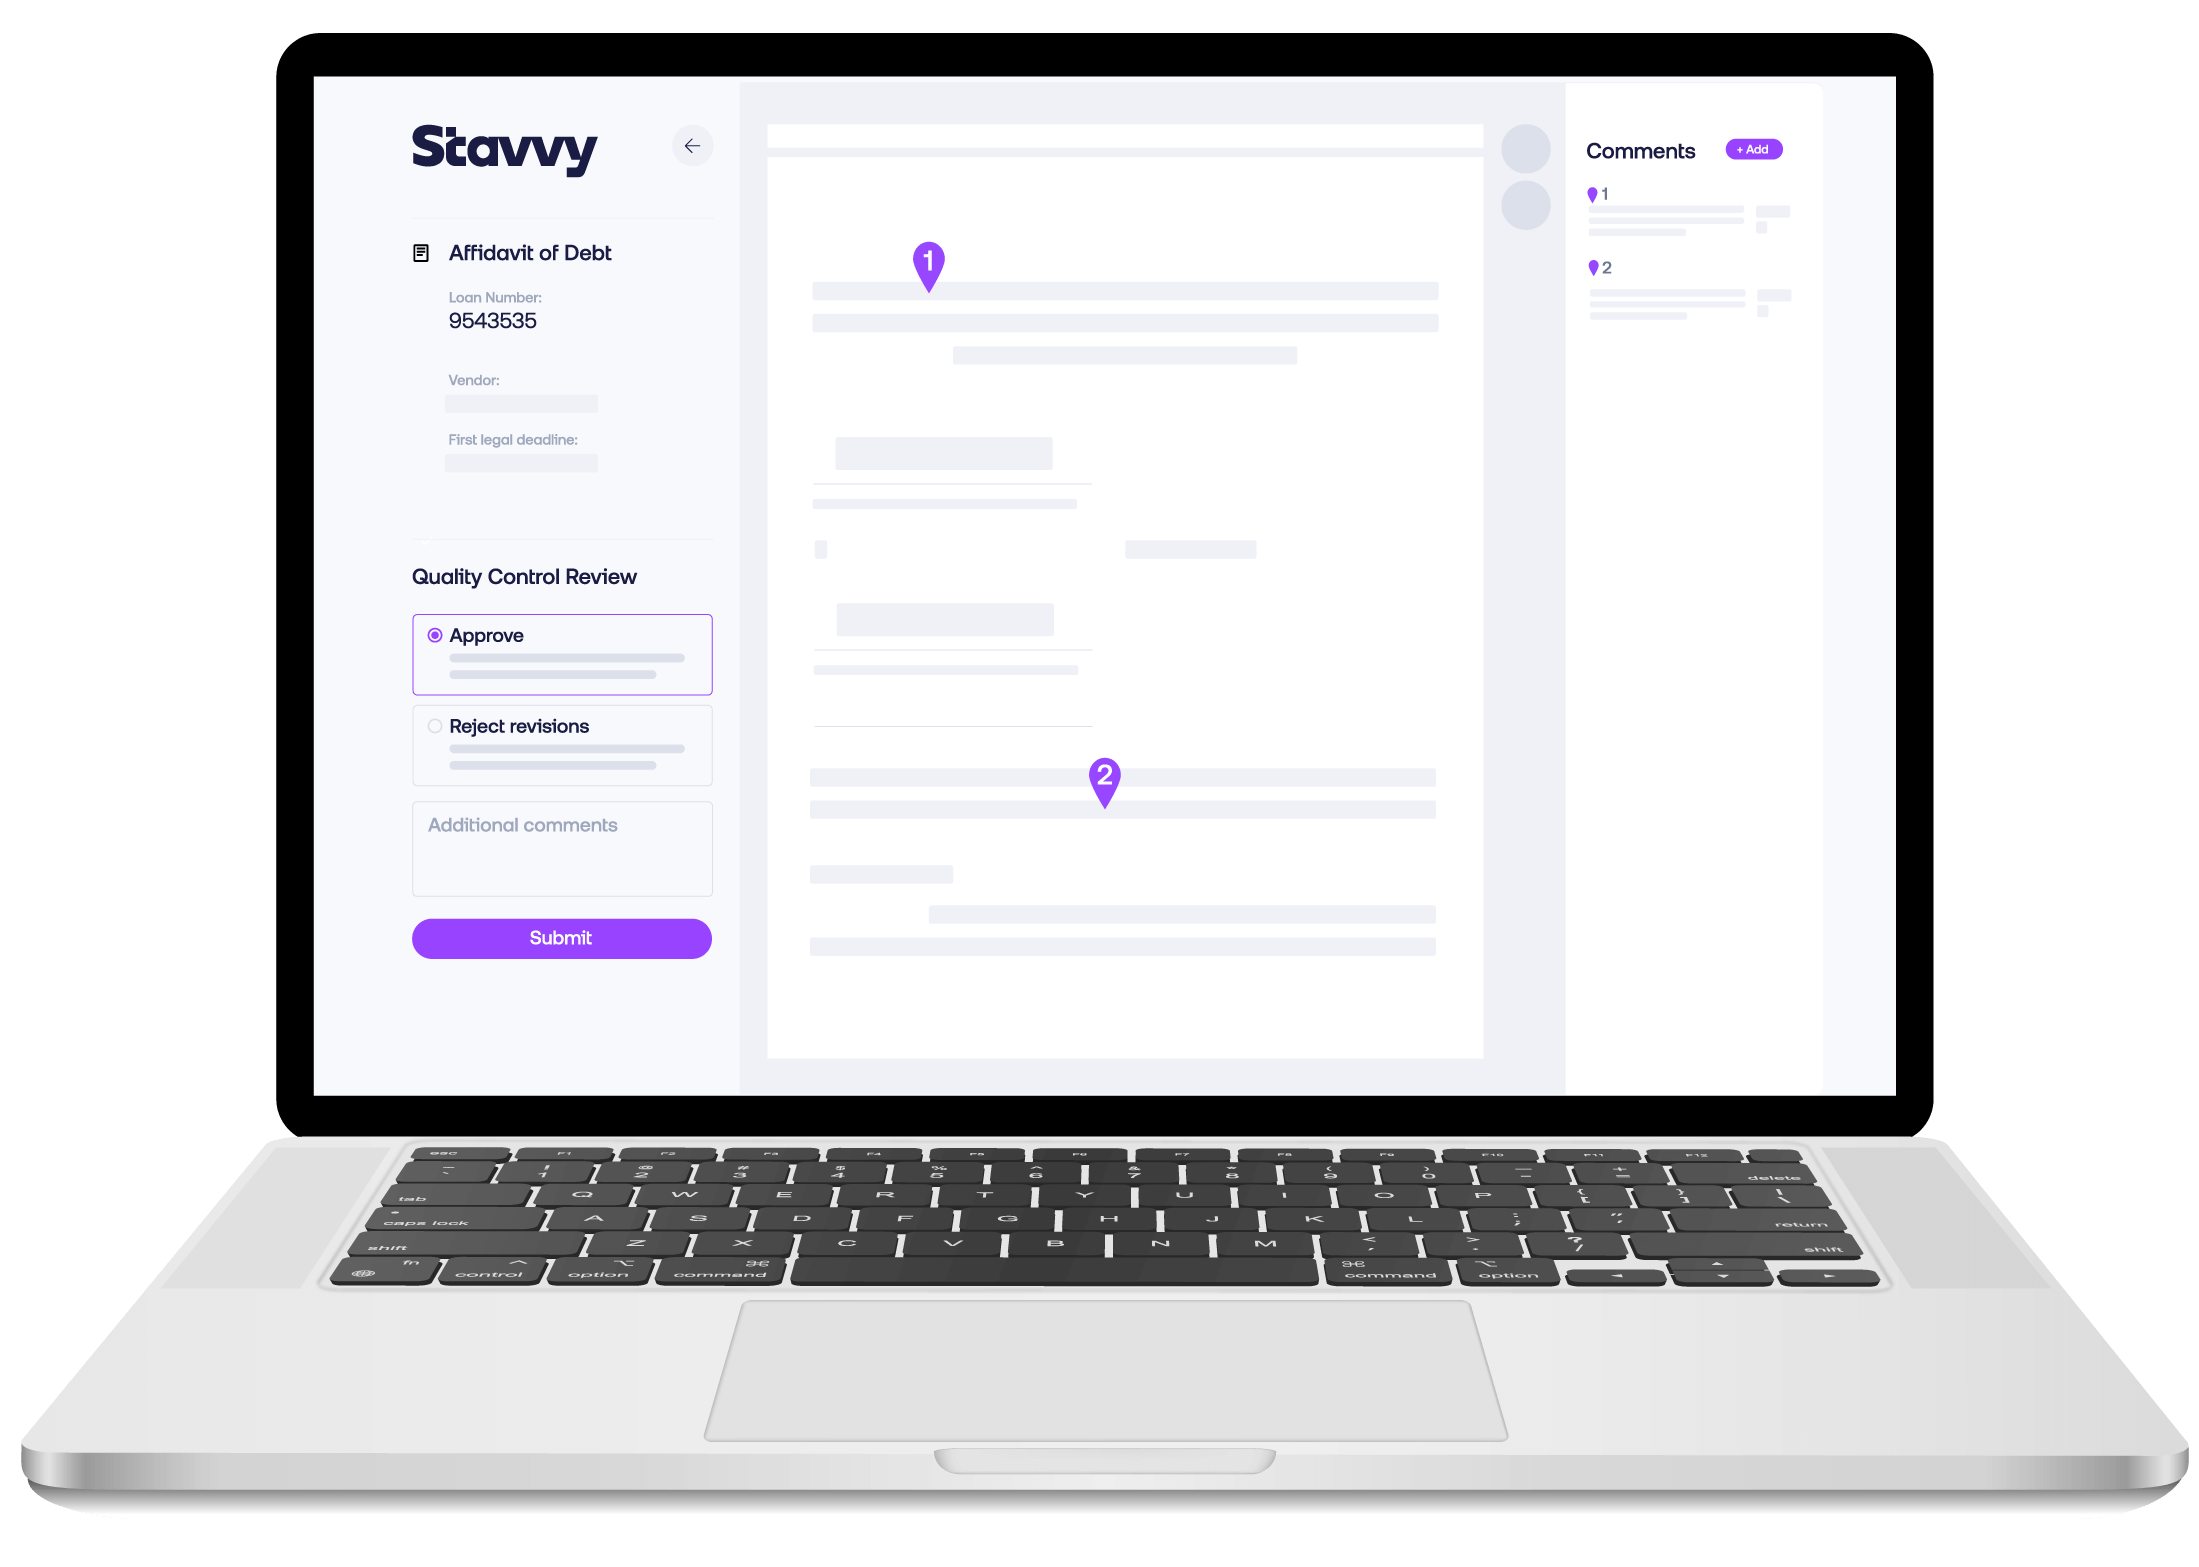 Illustration of secure foreclosure document exchange on the Stavvy platform